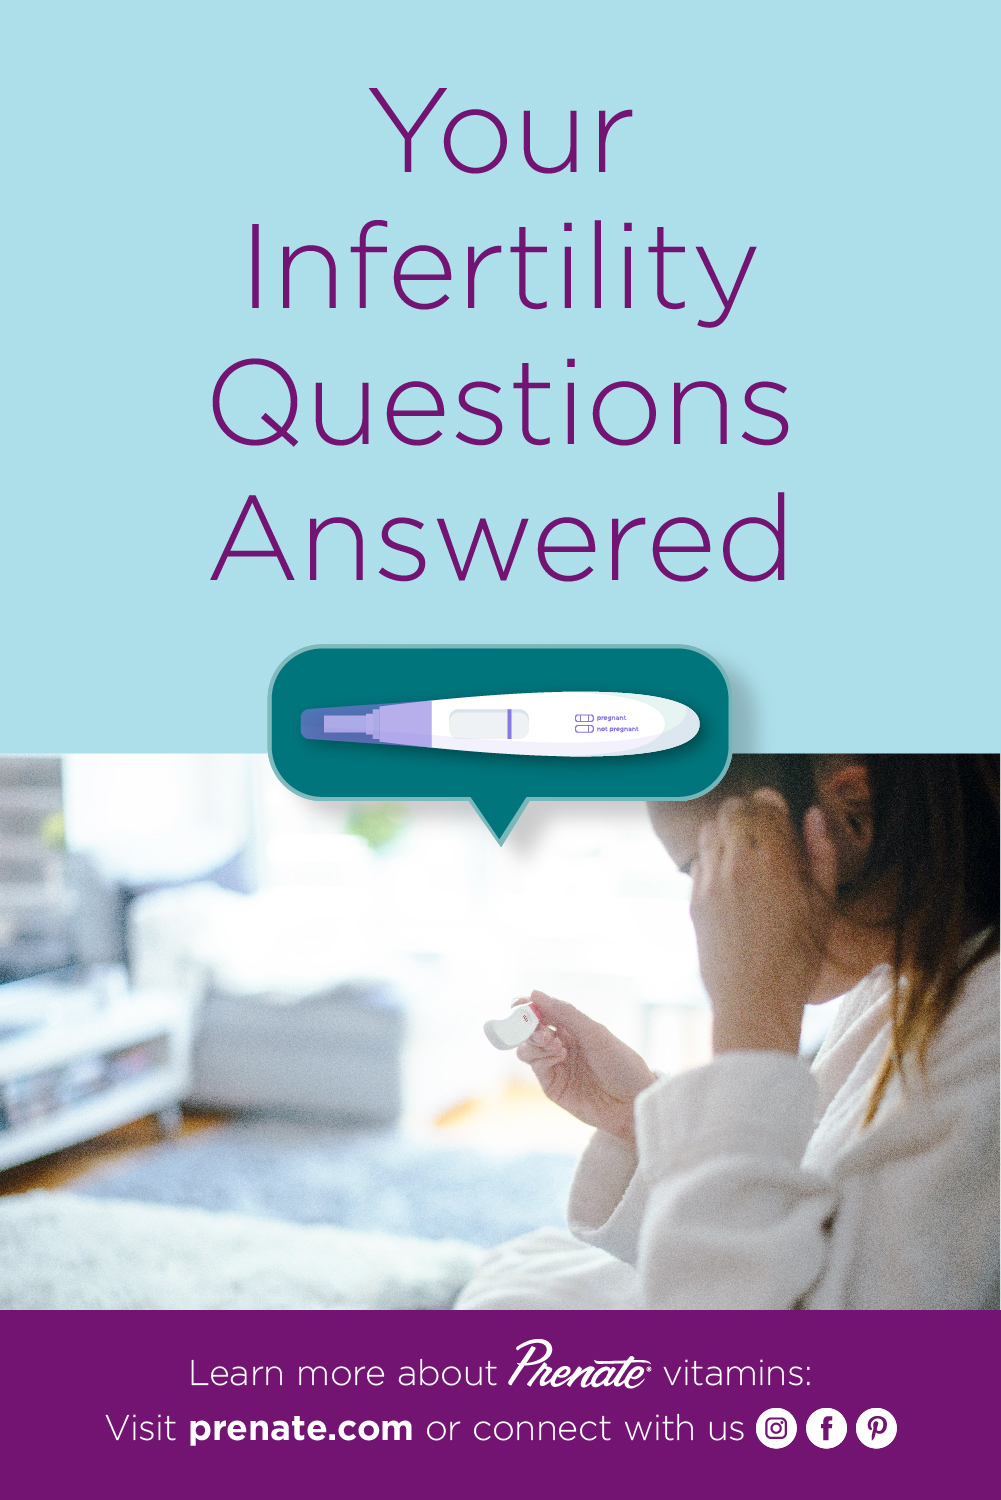 Infertility Questions Answered Pinterest graphic